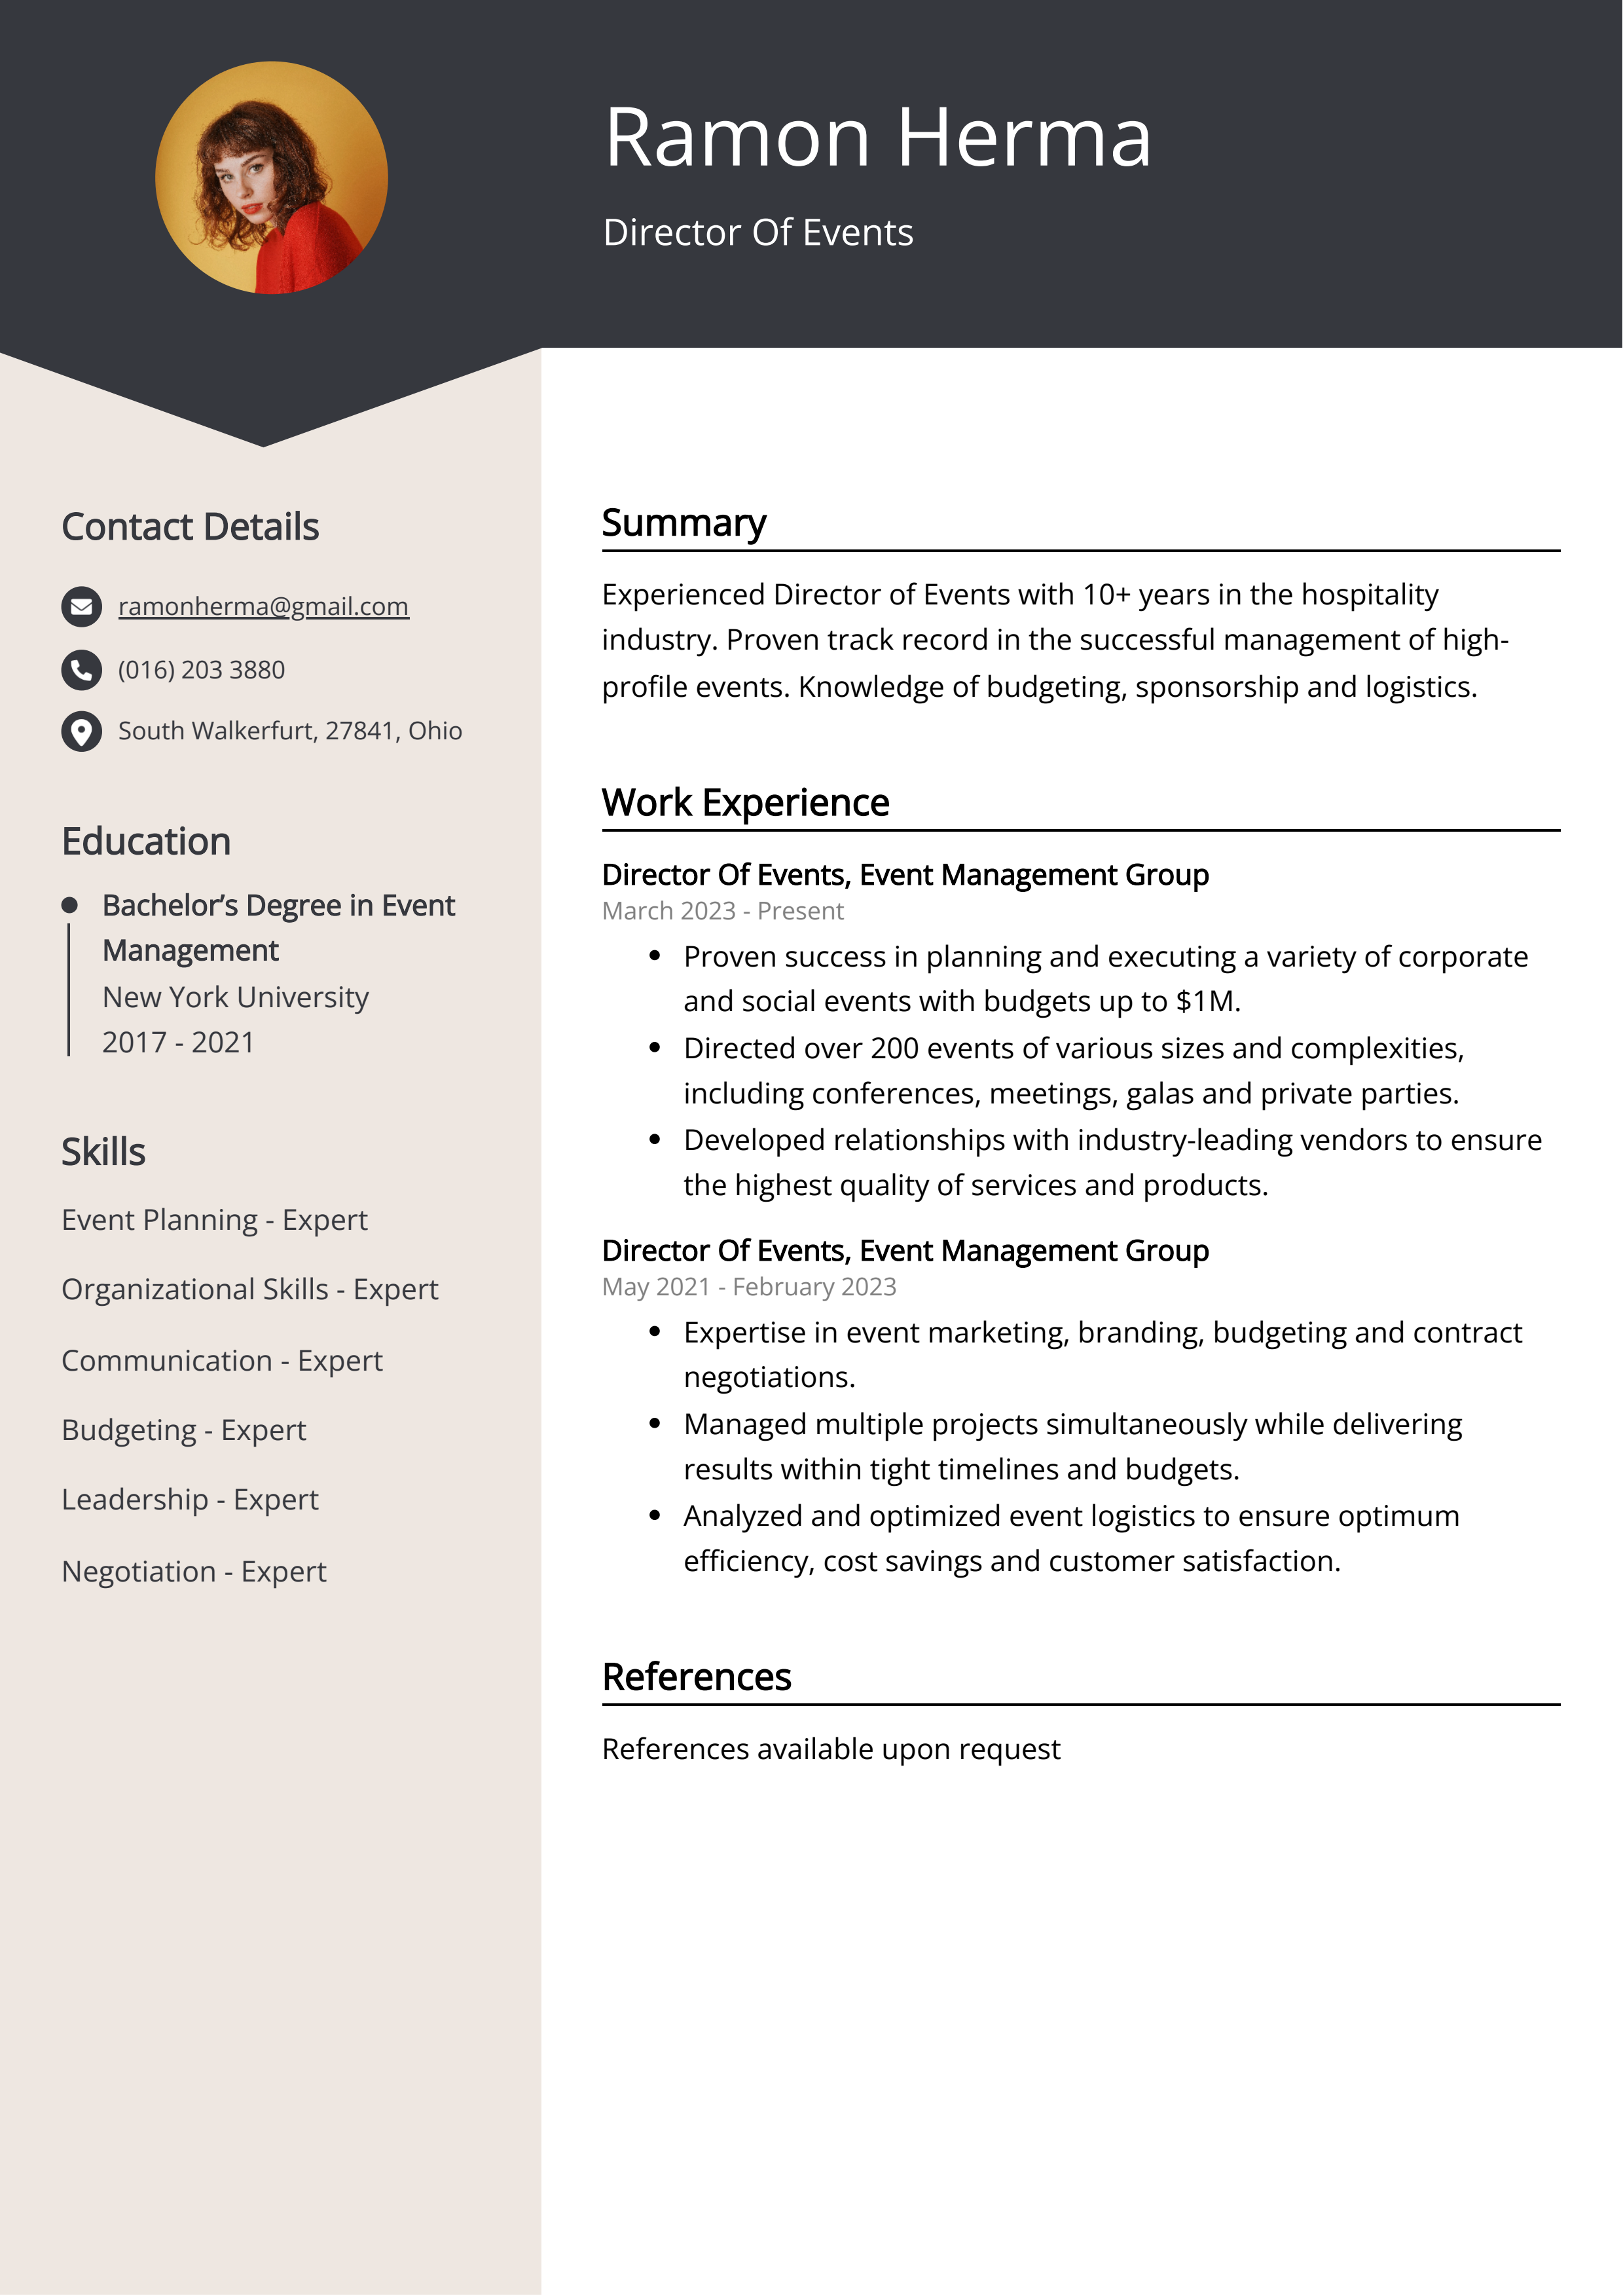 Director Of Events CV Example